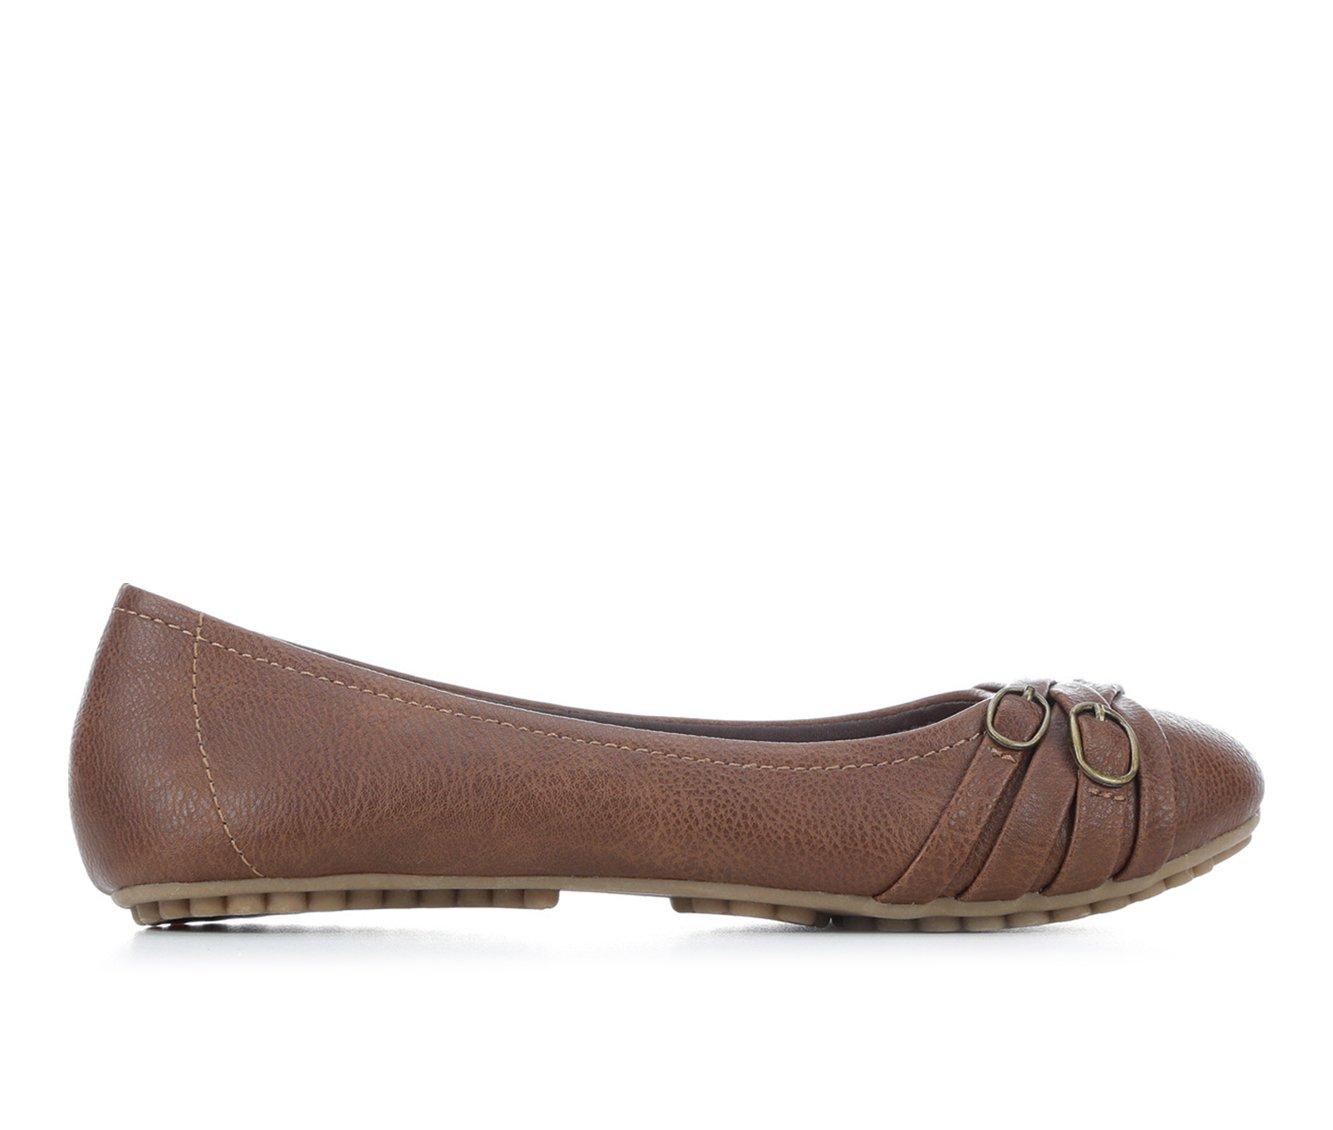 Cher leather ballet flats